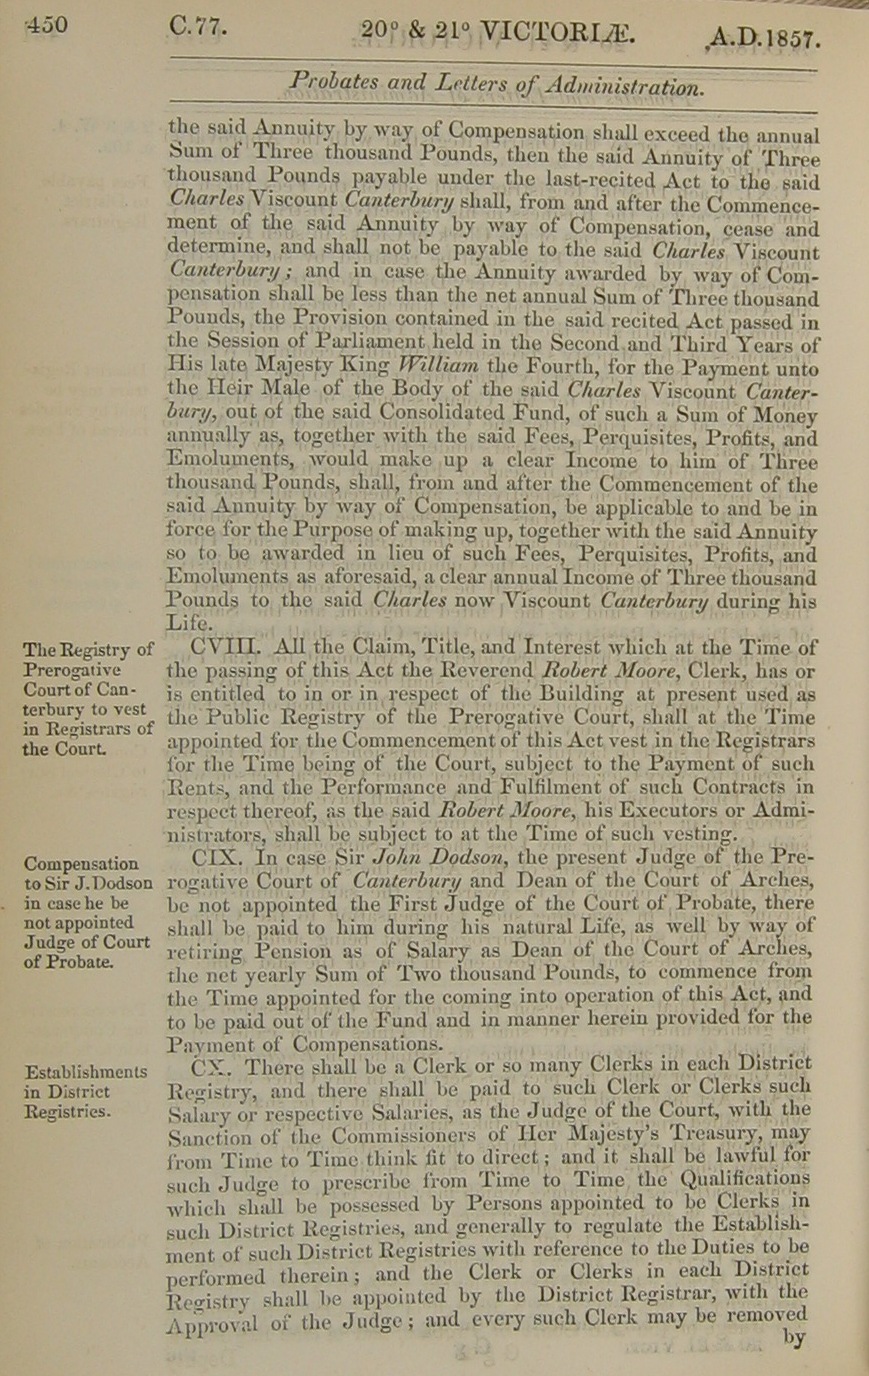 Image of 20 & 21 Victoria I, c. 77 (page 29 of 34). Click for larger image.